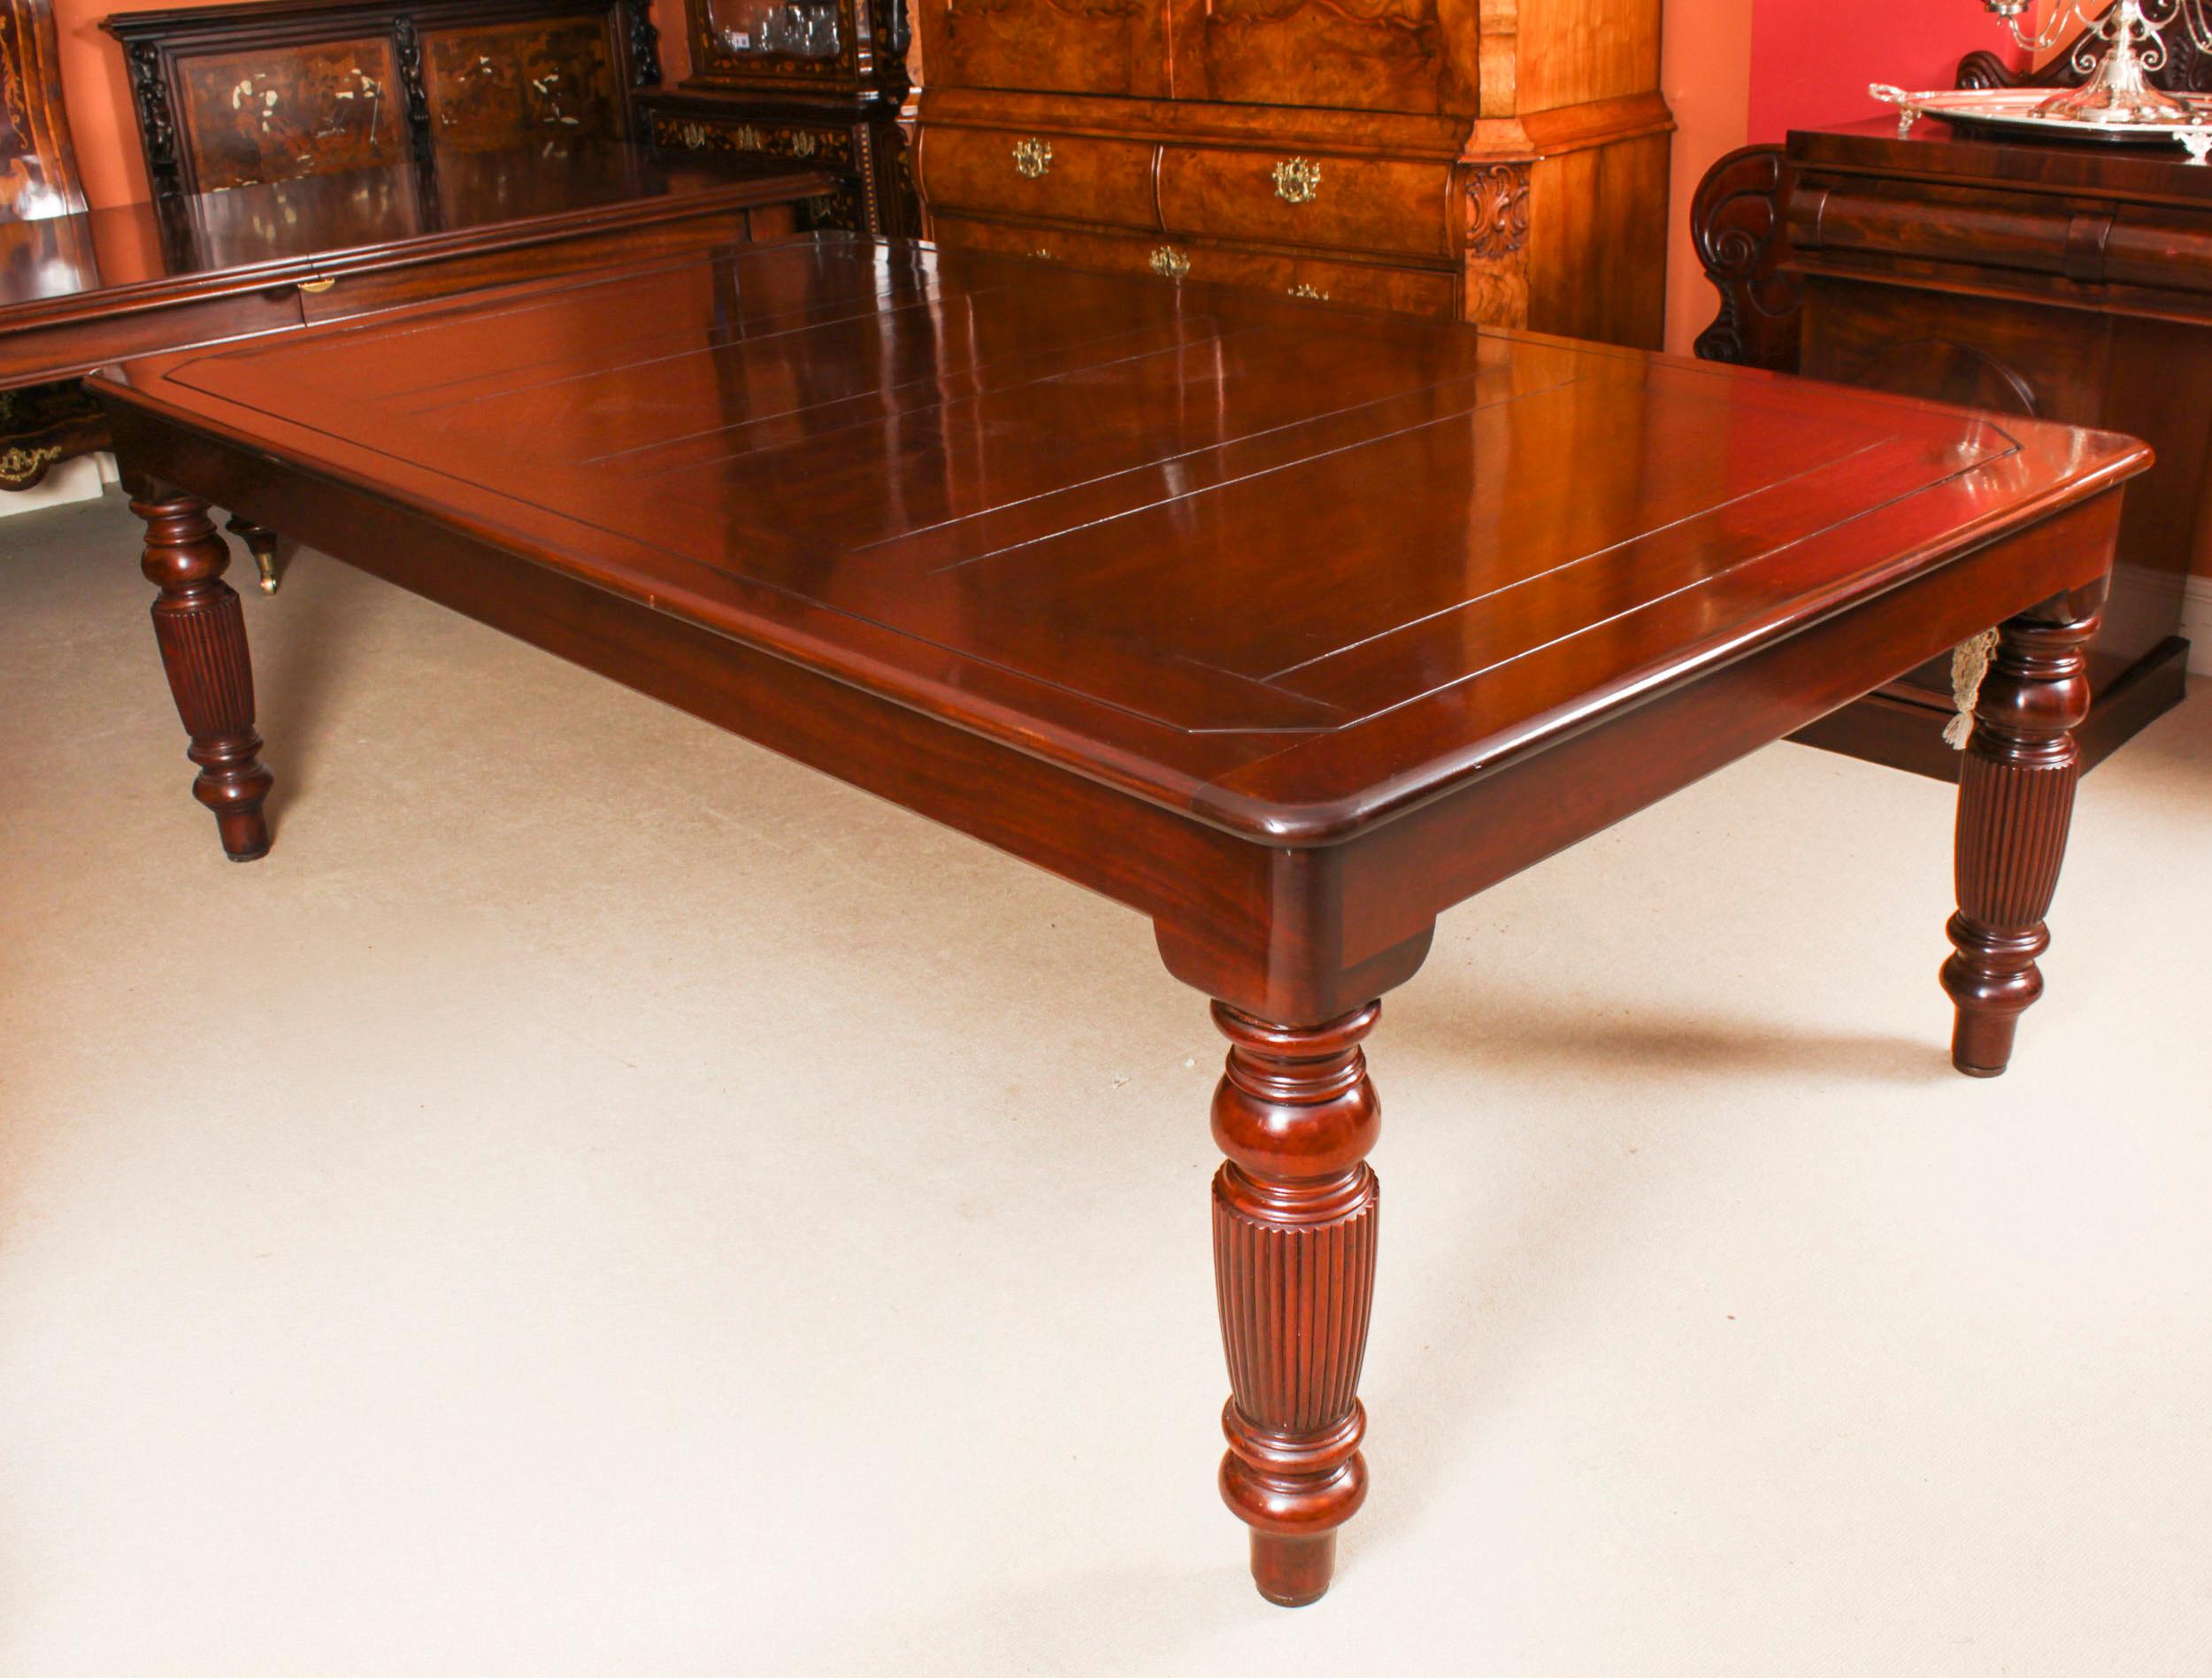 A superb antique Victorian revolving mahogany billiards table/dining table, in the manner of Riley, and the matching set ten Chippendale Revival dining chairs, all  dating from Circa 1880.

The oblong top rotating on a central axis to reveal a